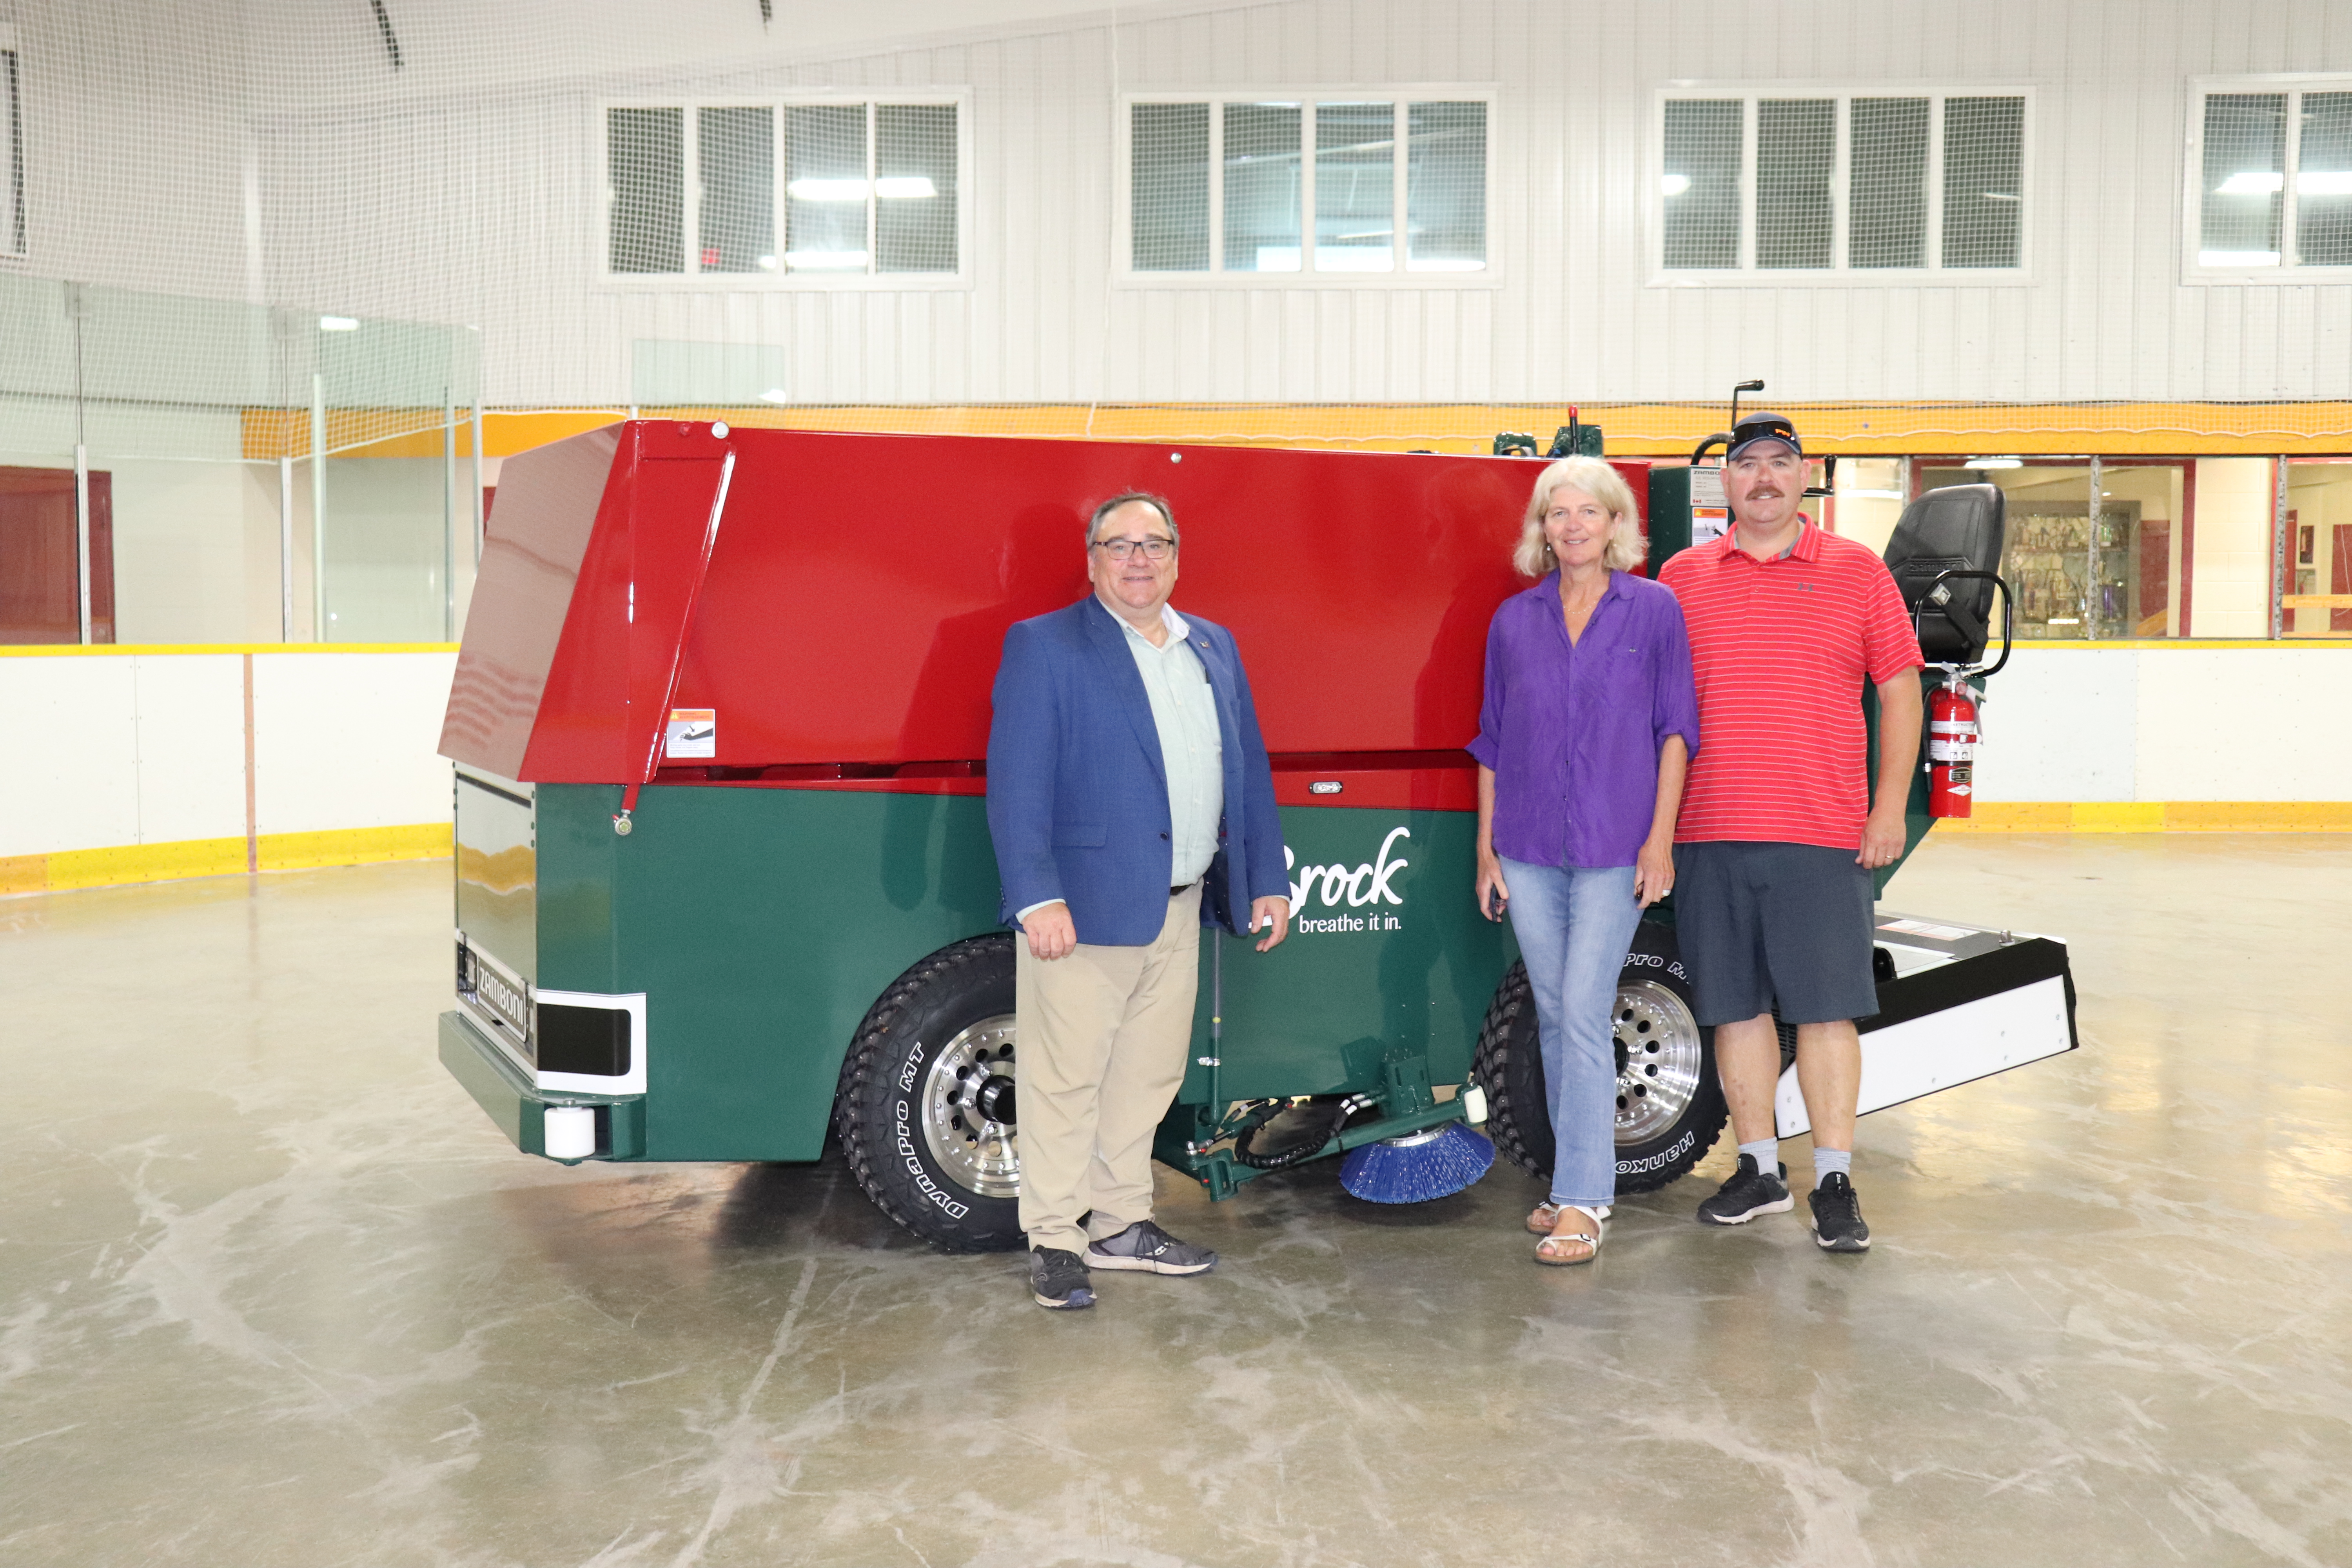 Eletronic zamboni red and gree and Mayor Schummer, Regional Councillor Mike Jubb, Councillor Cria Pettingill